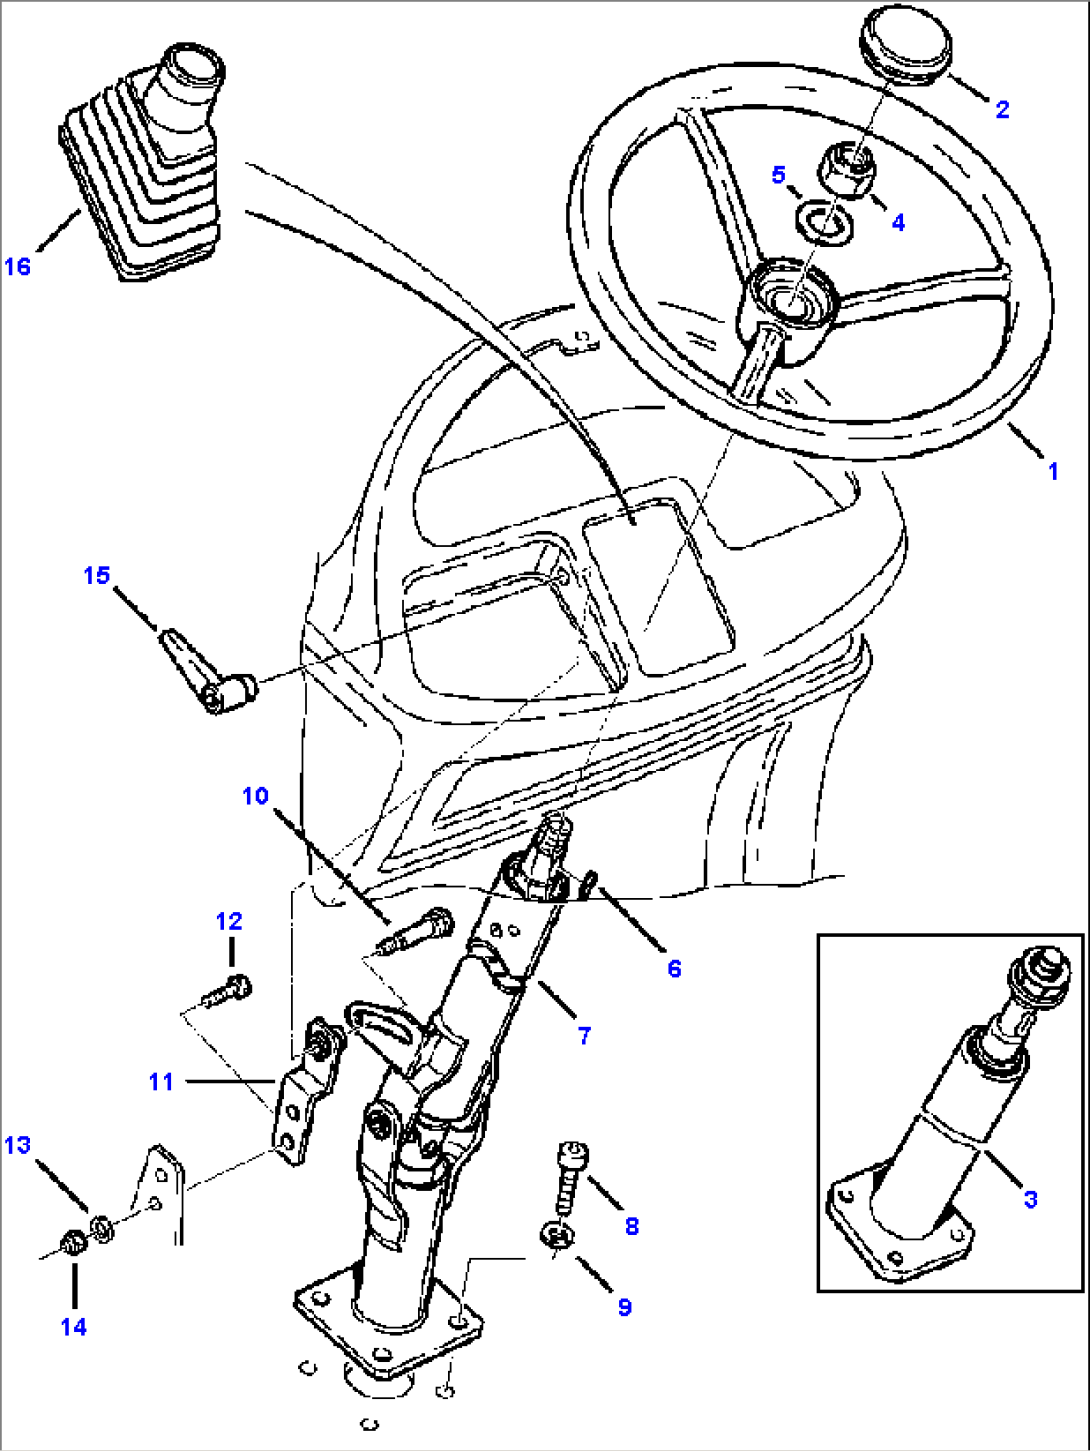 FIG. K6001-01A0 CANOPY STEERING WHEEL AND COLUMN